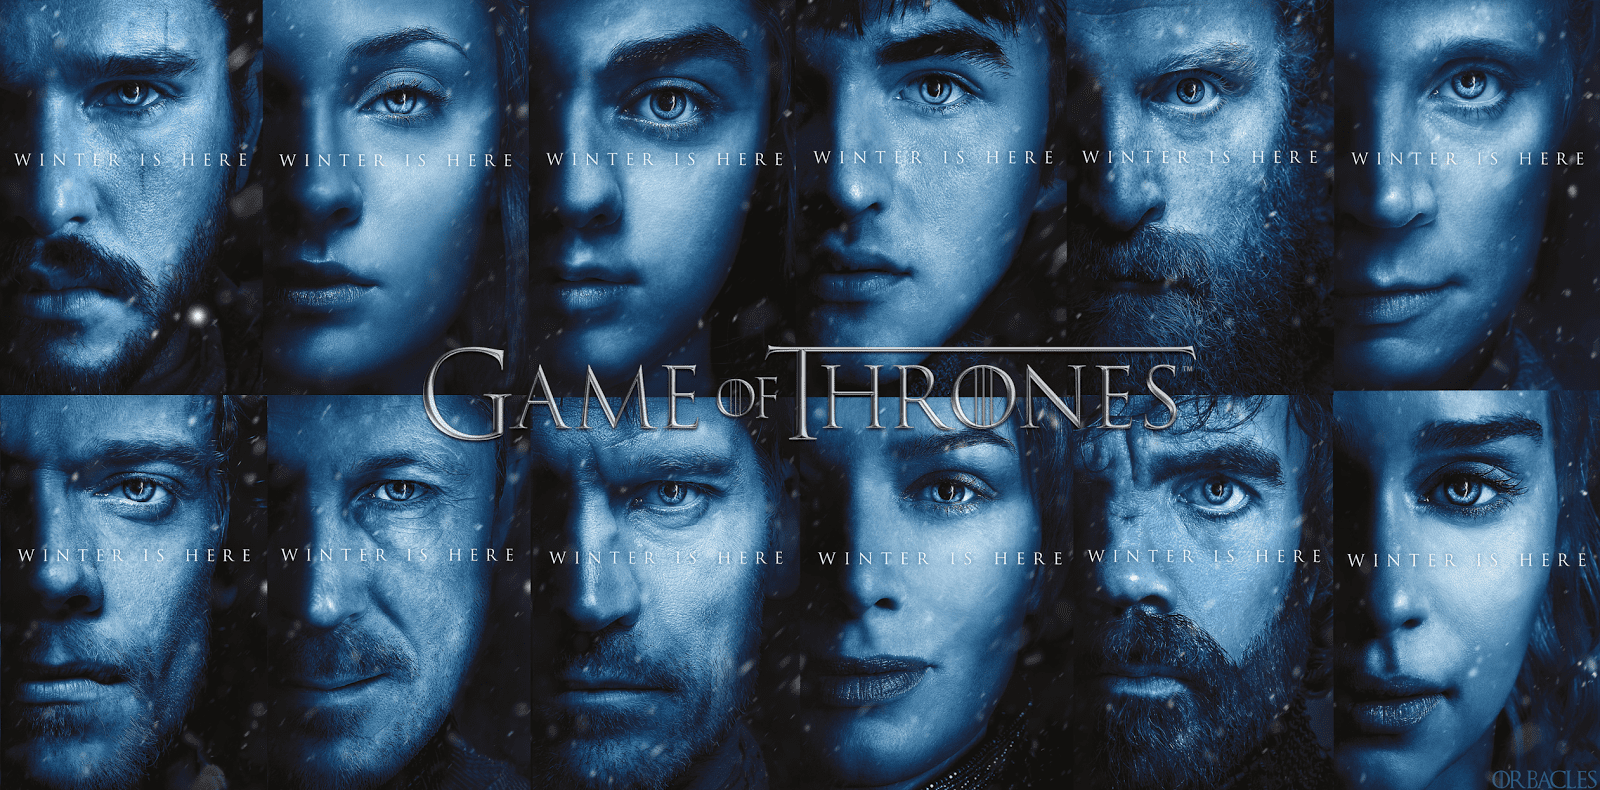  NEWS – Game of Thrones